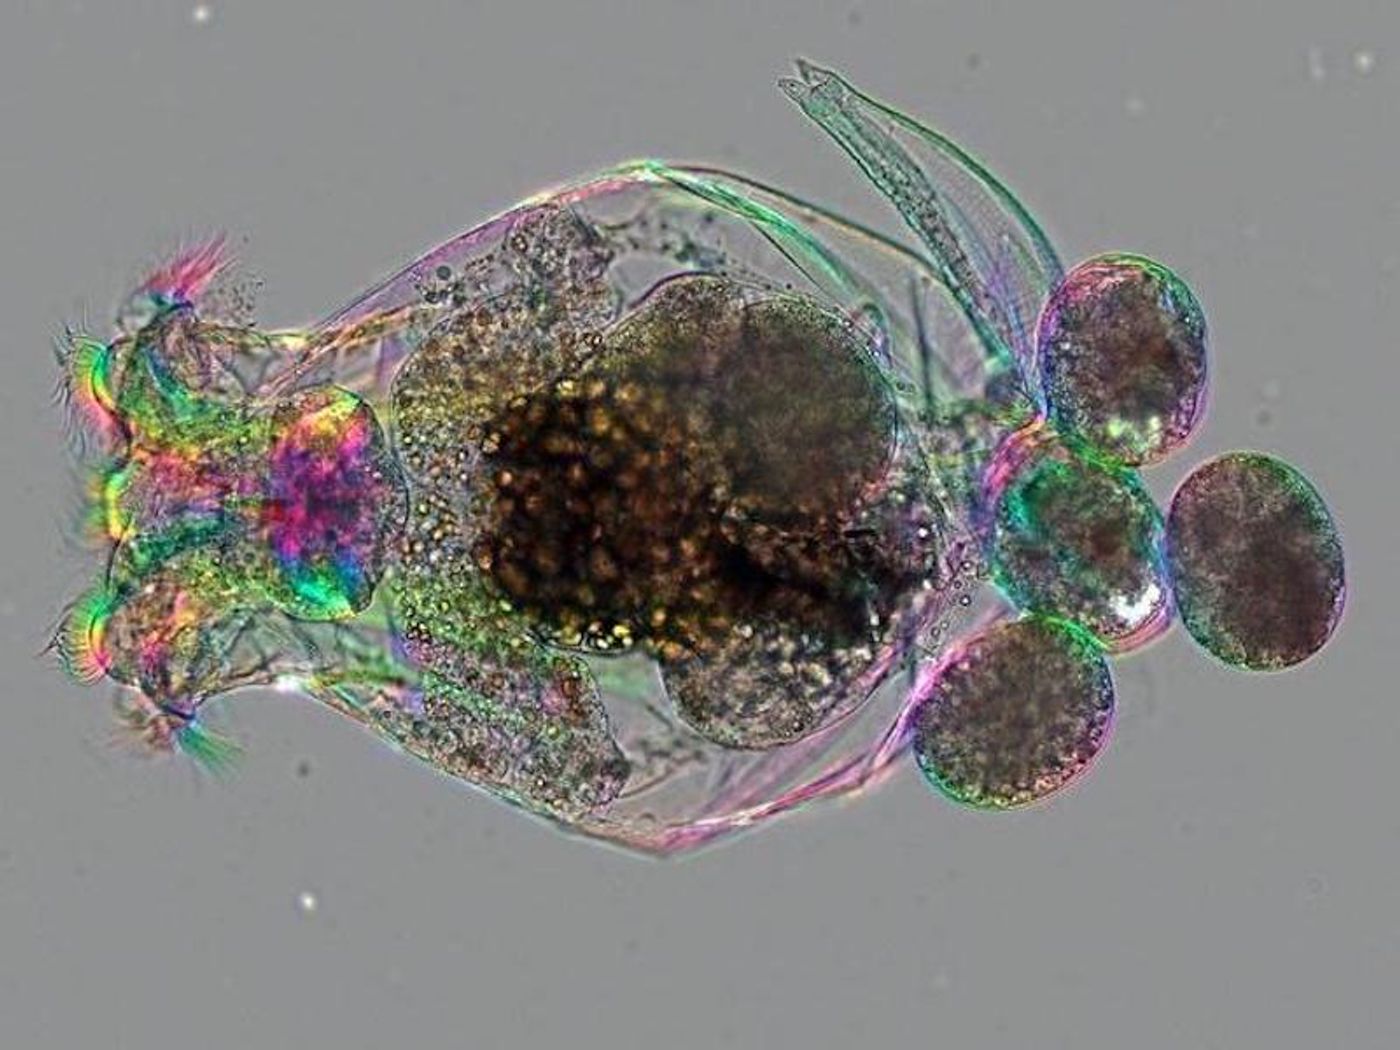 A female Brachionus manjavacas rotifer, as magnified under a microscope. This rotifer is 350 µm long; about the size of a grain of sand.  / Credit: Michael Shribak and Kristin Gribble